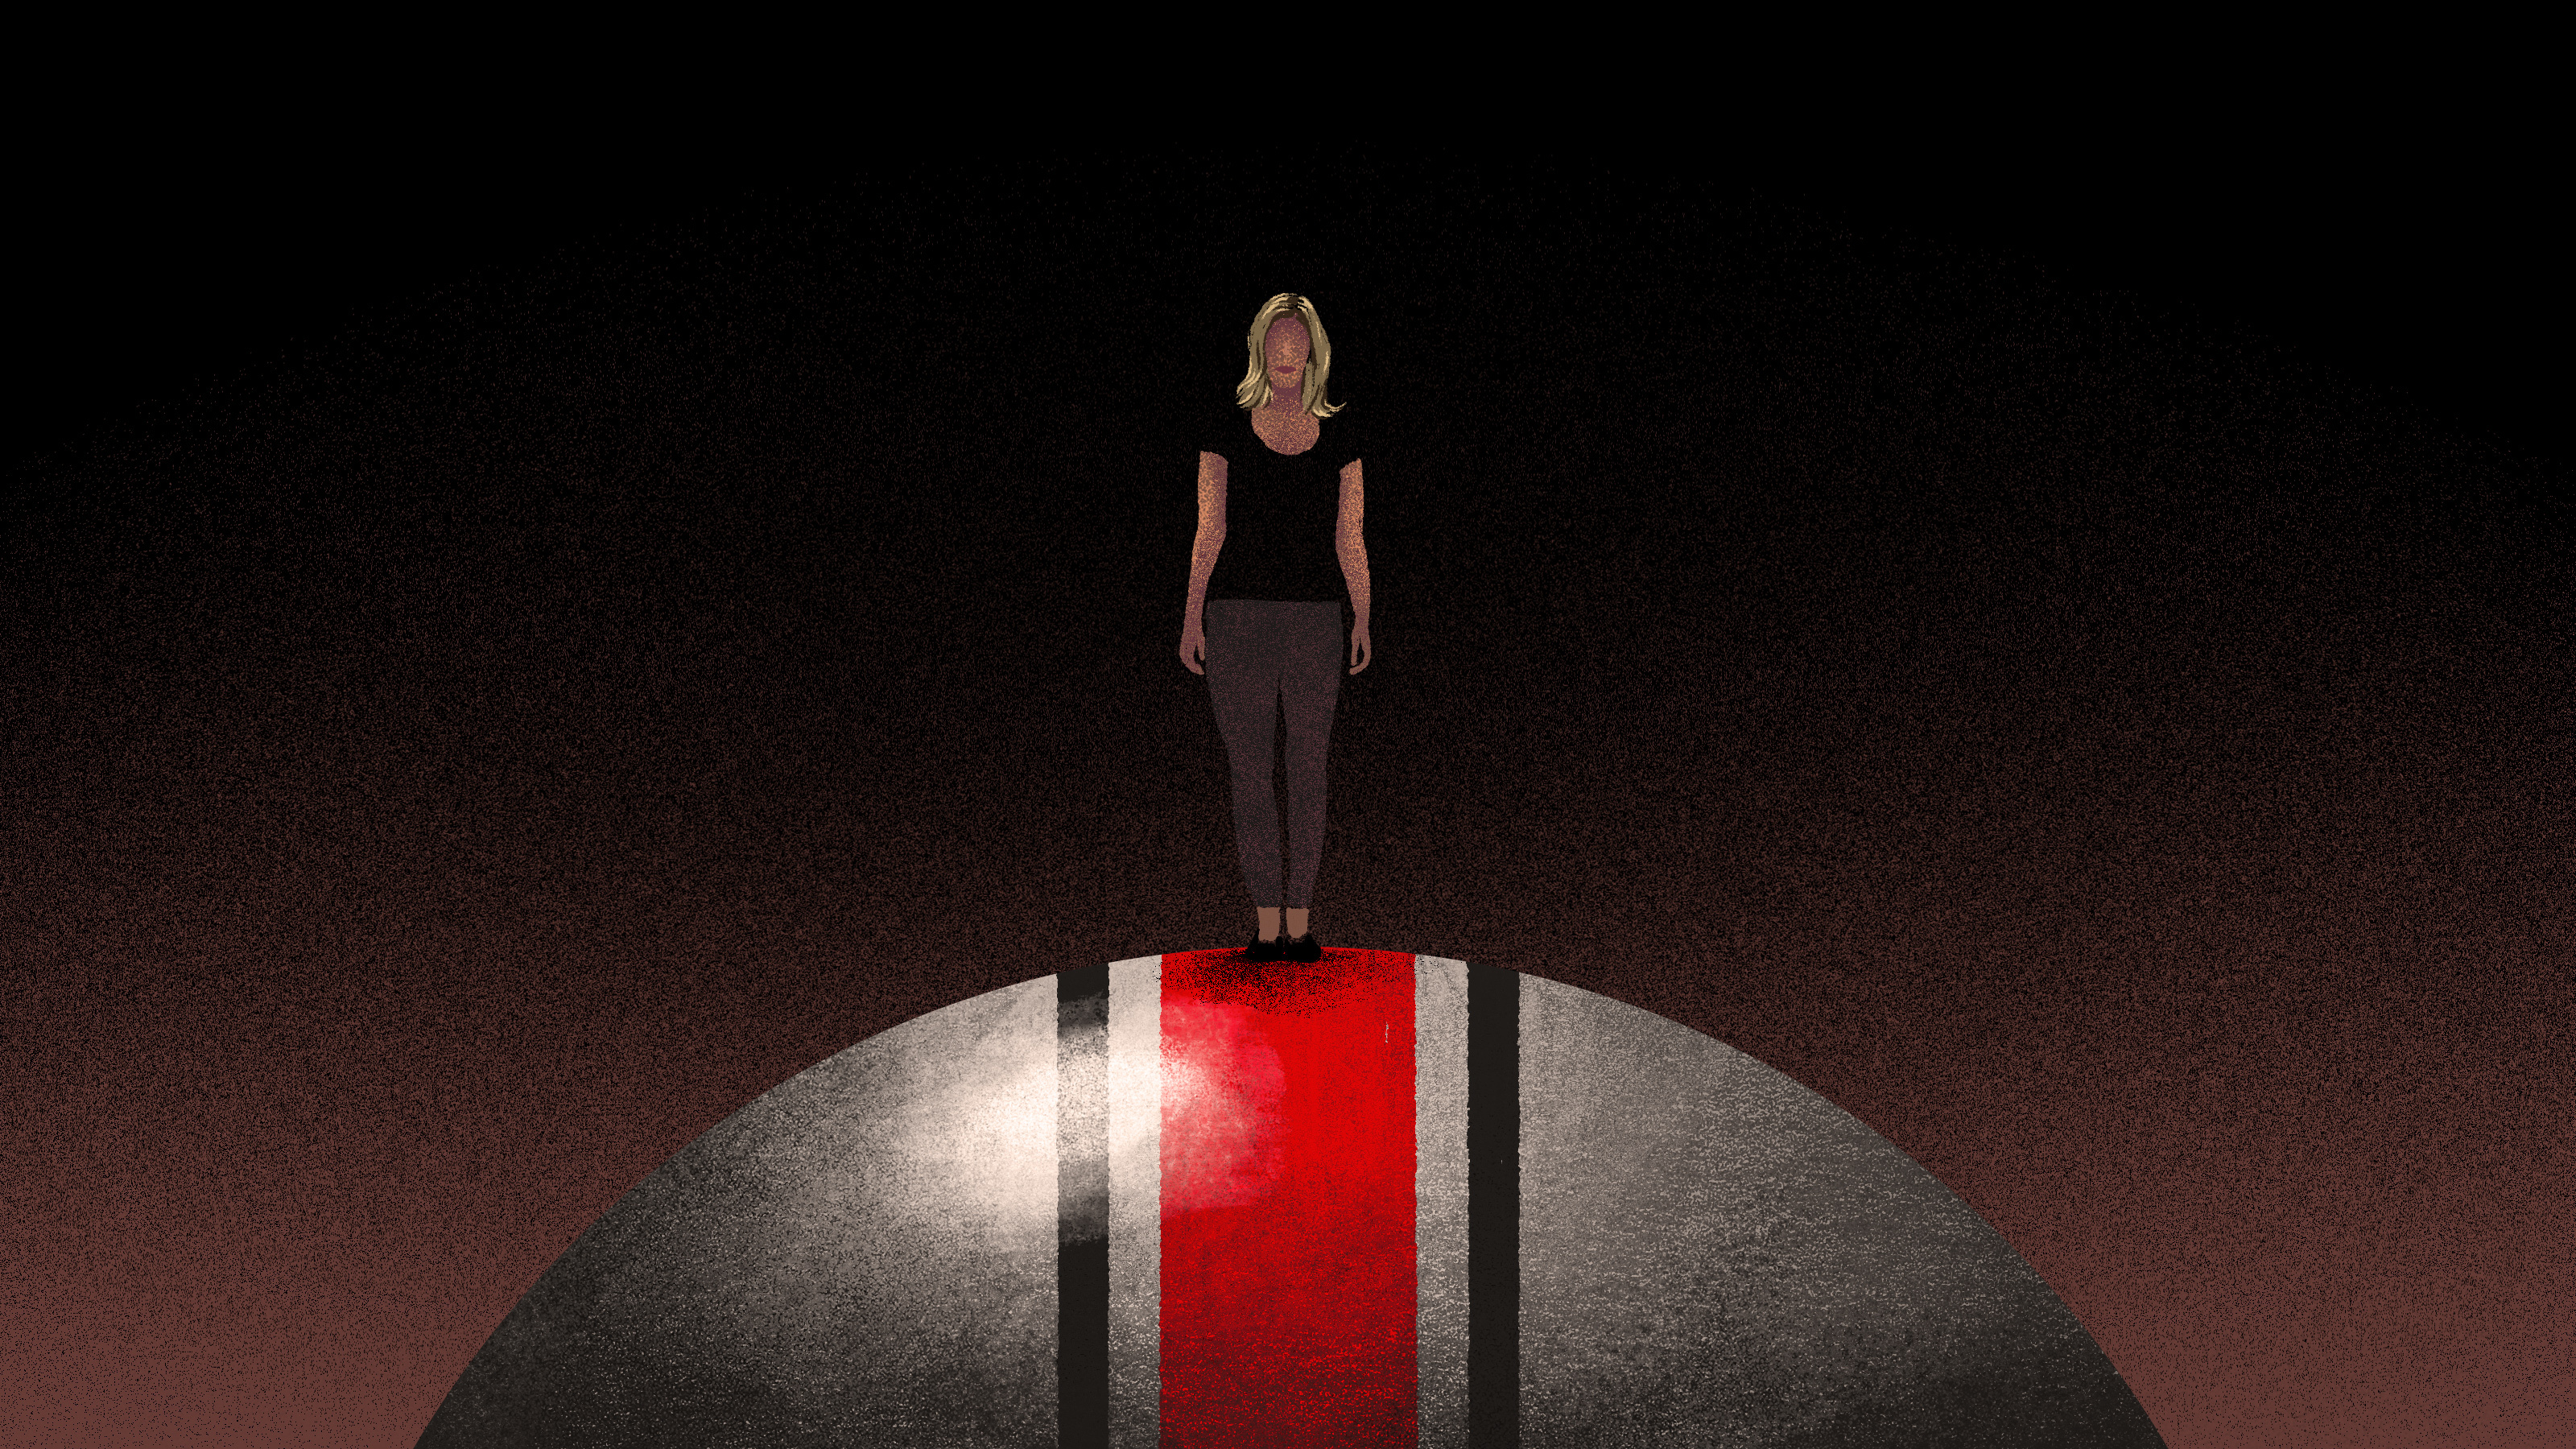 An image of a woman standing atop an Ohio State football helmet. She is very small, while the helmet fills the frame. Behind her is darkness.